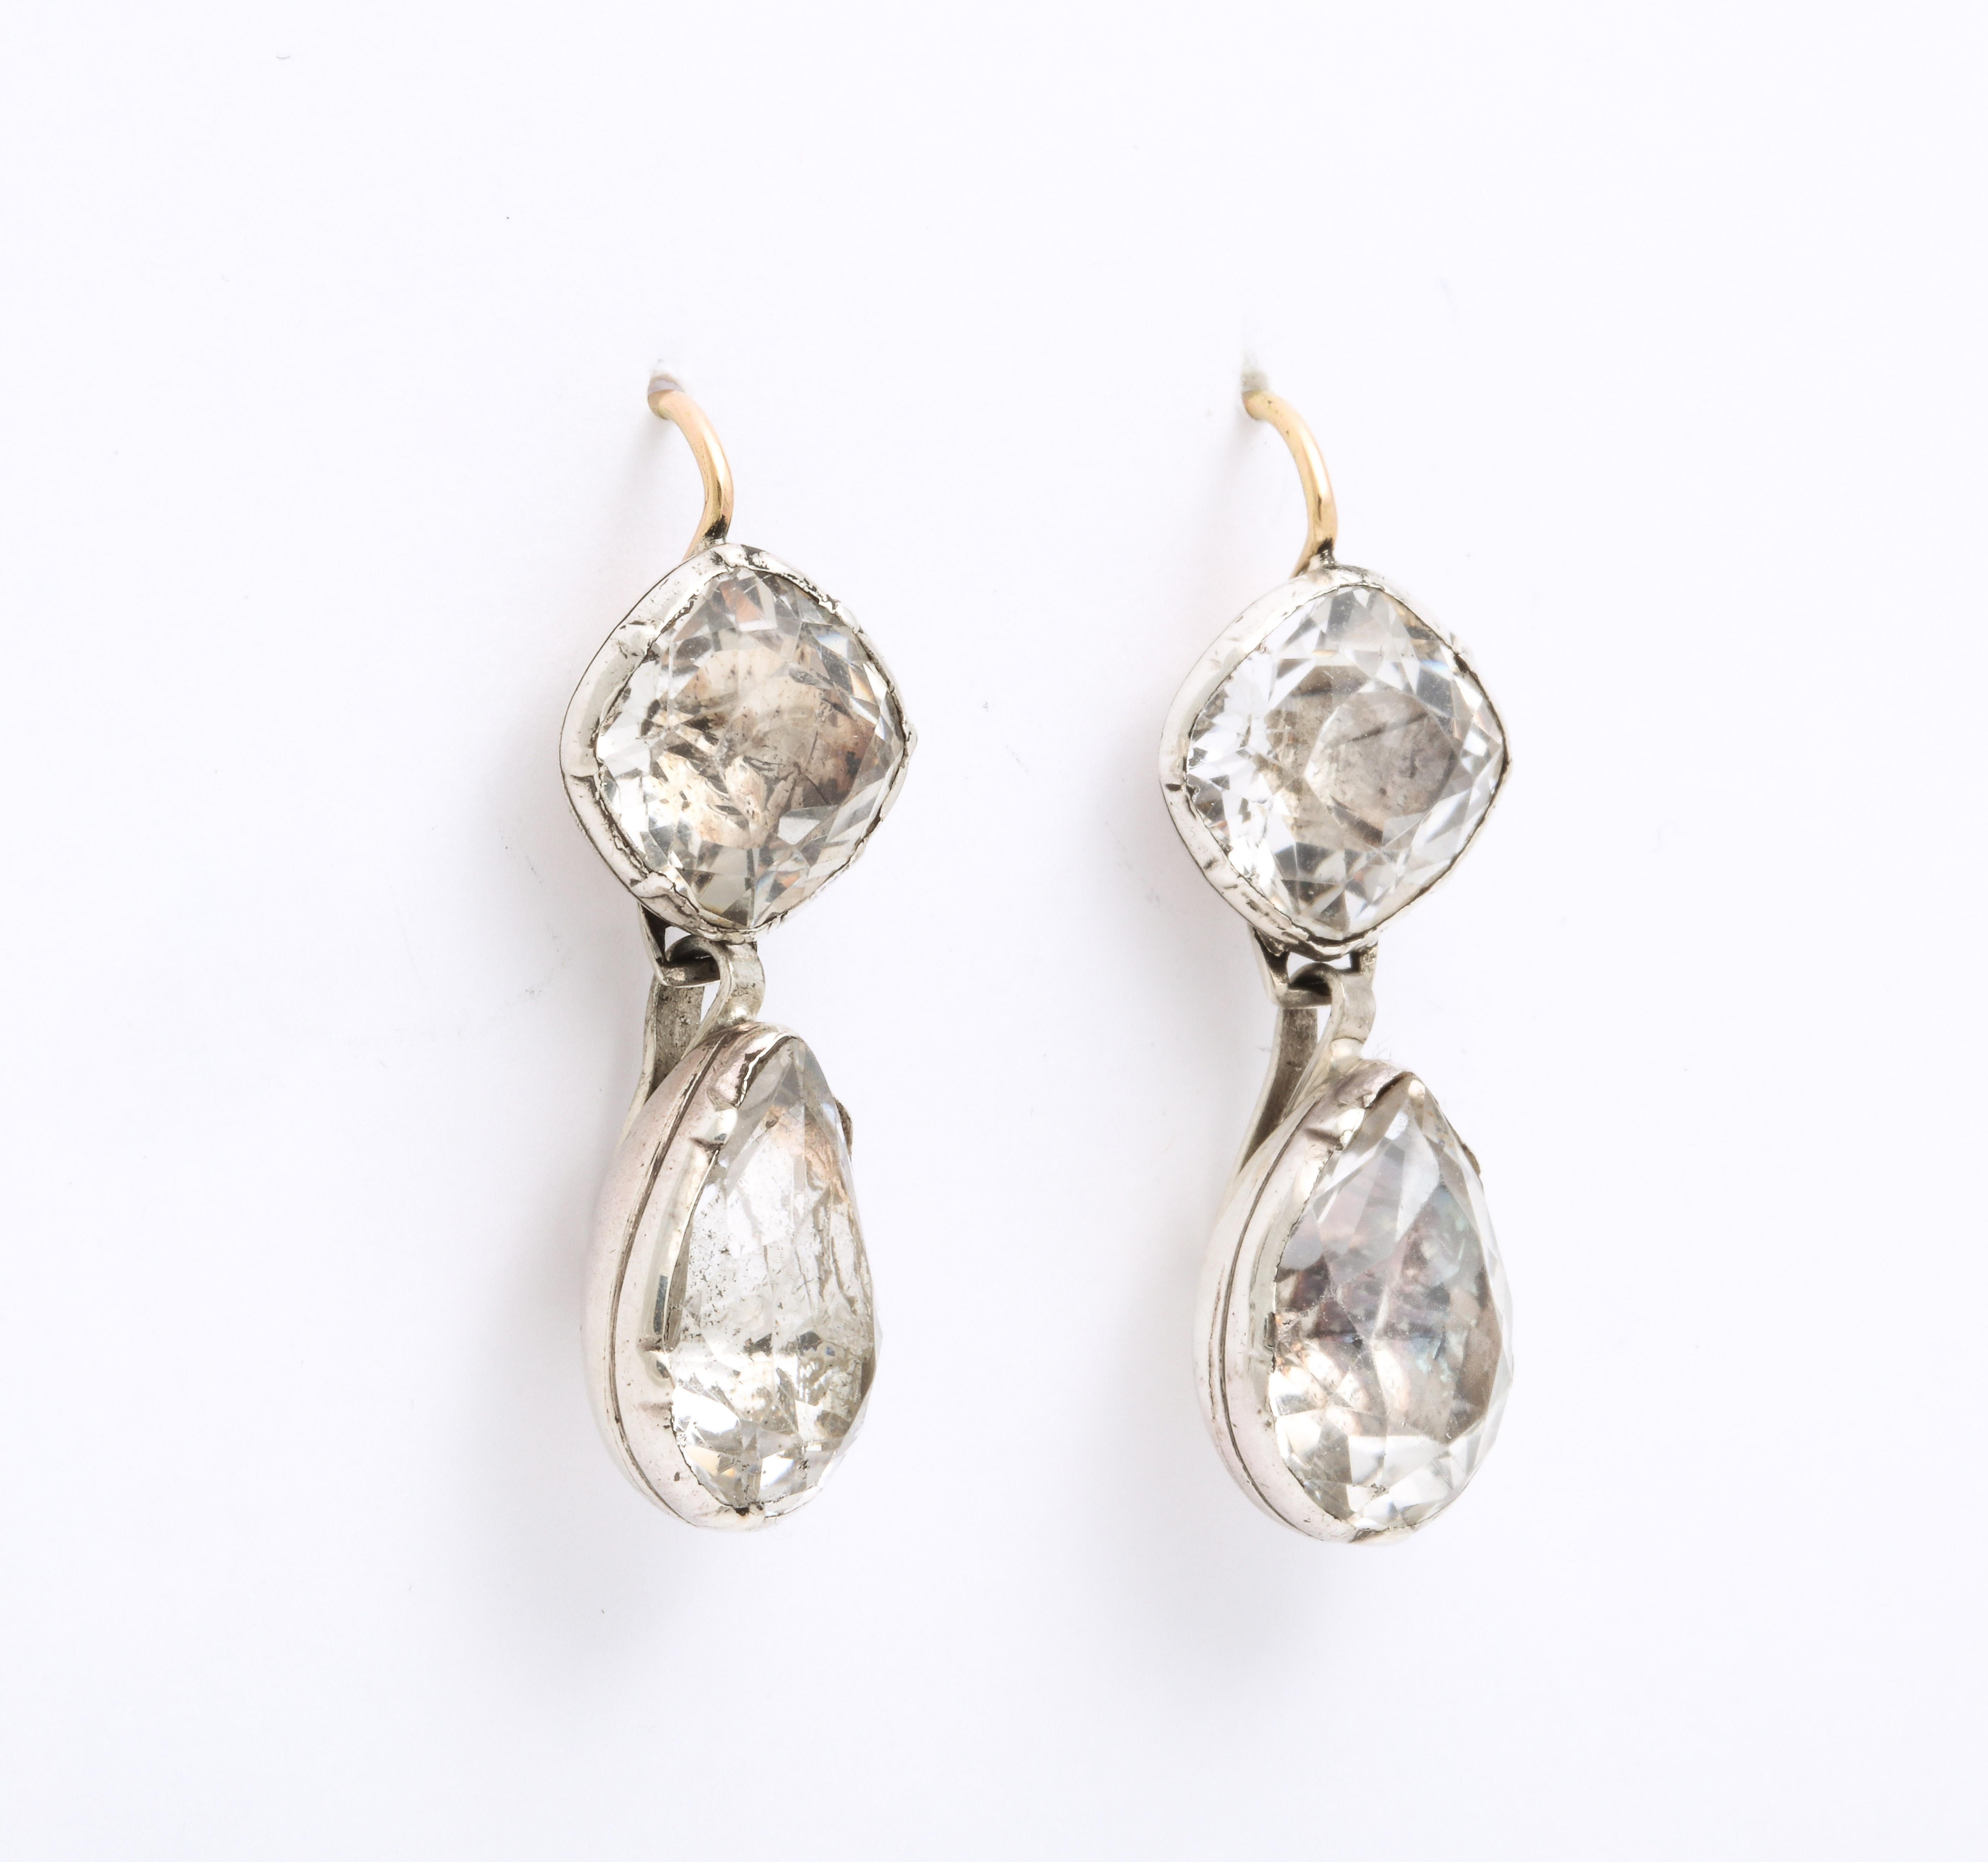 Magnificent, rare in size and glow, these Georgian foiled rock crystal earrings are set in their rounded closed foiled backs and shine brilliantly in sunlight or darkness. These earrings are a treasure of jewelry history and show what the royal love